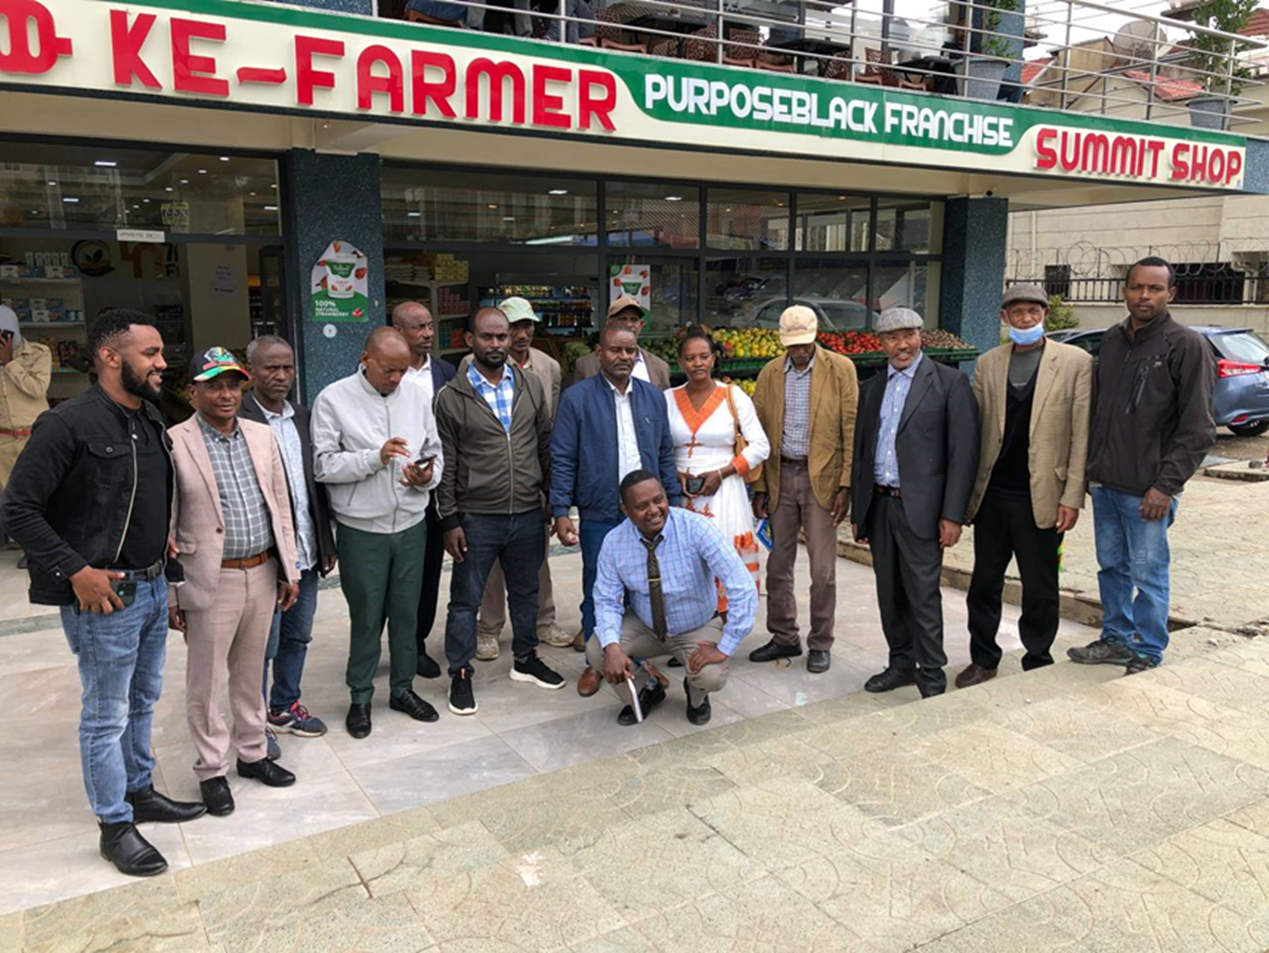 Farmer Unions members in Ethiopia meet for experience-sharing